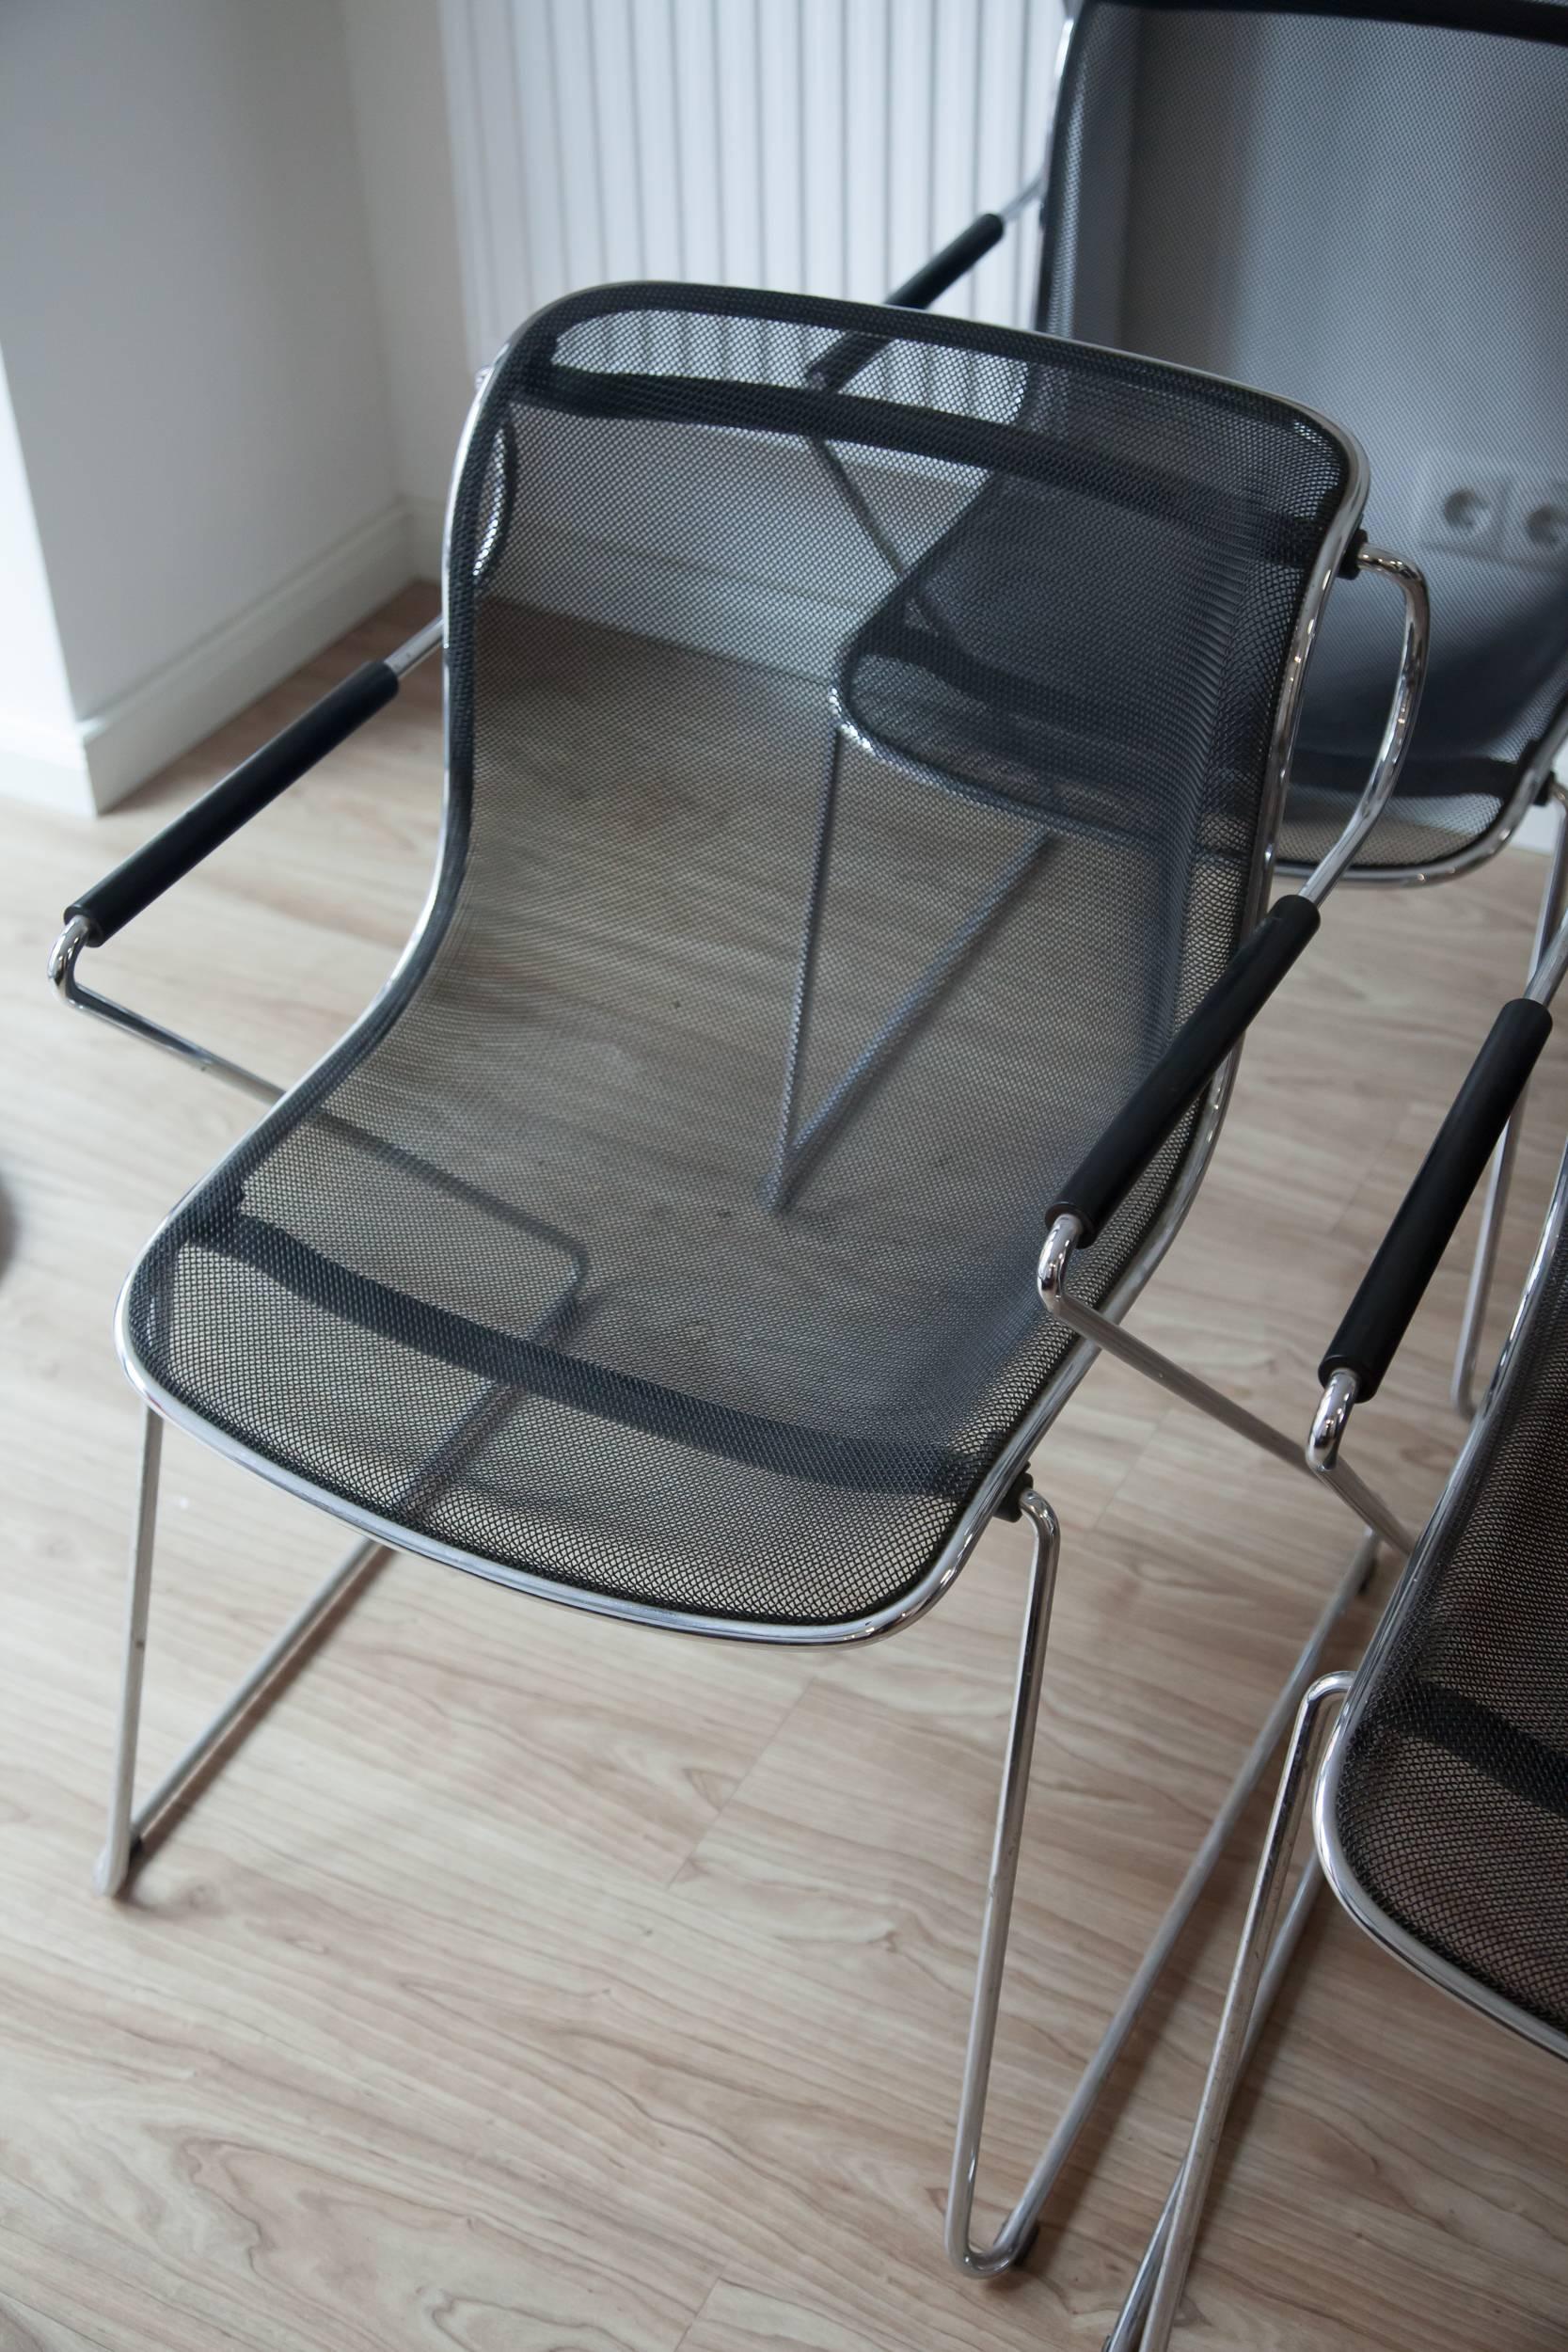 A set of six ergonomic stacking chairs designed by Charles Pollock (brother of Jackson Pollock) for Anonima Castelli (Italy). They have a metal frame with formed mesh seats and backs. Measure: Each chair weighs 8 kg.